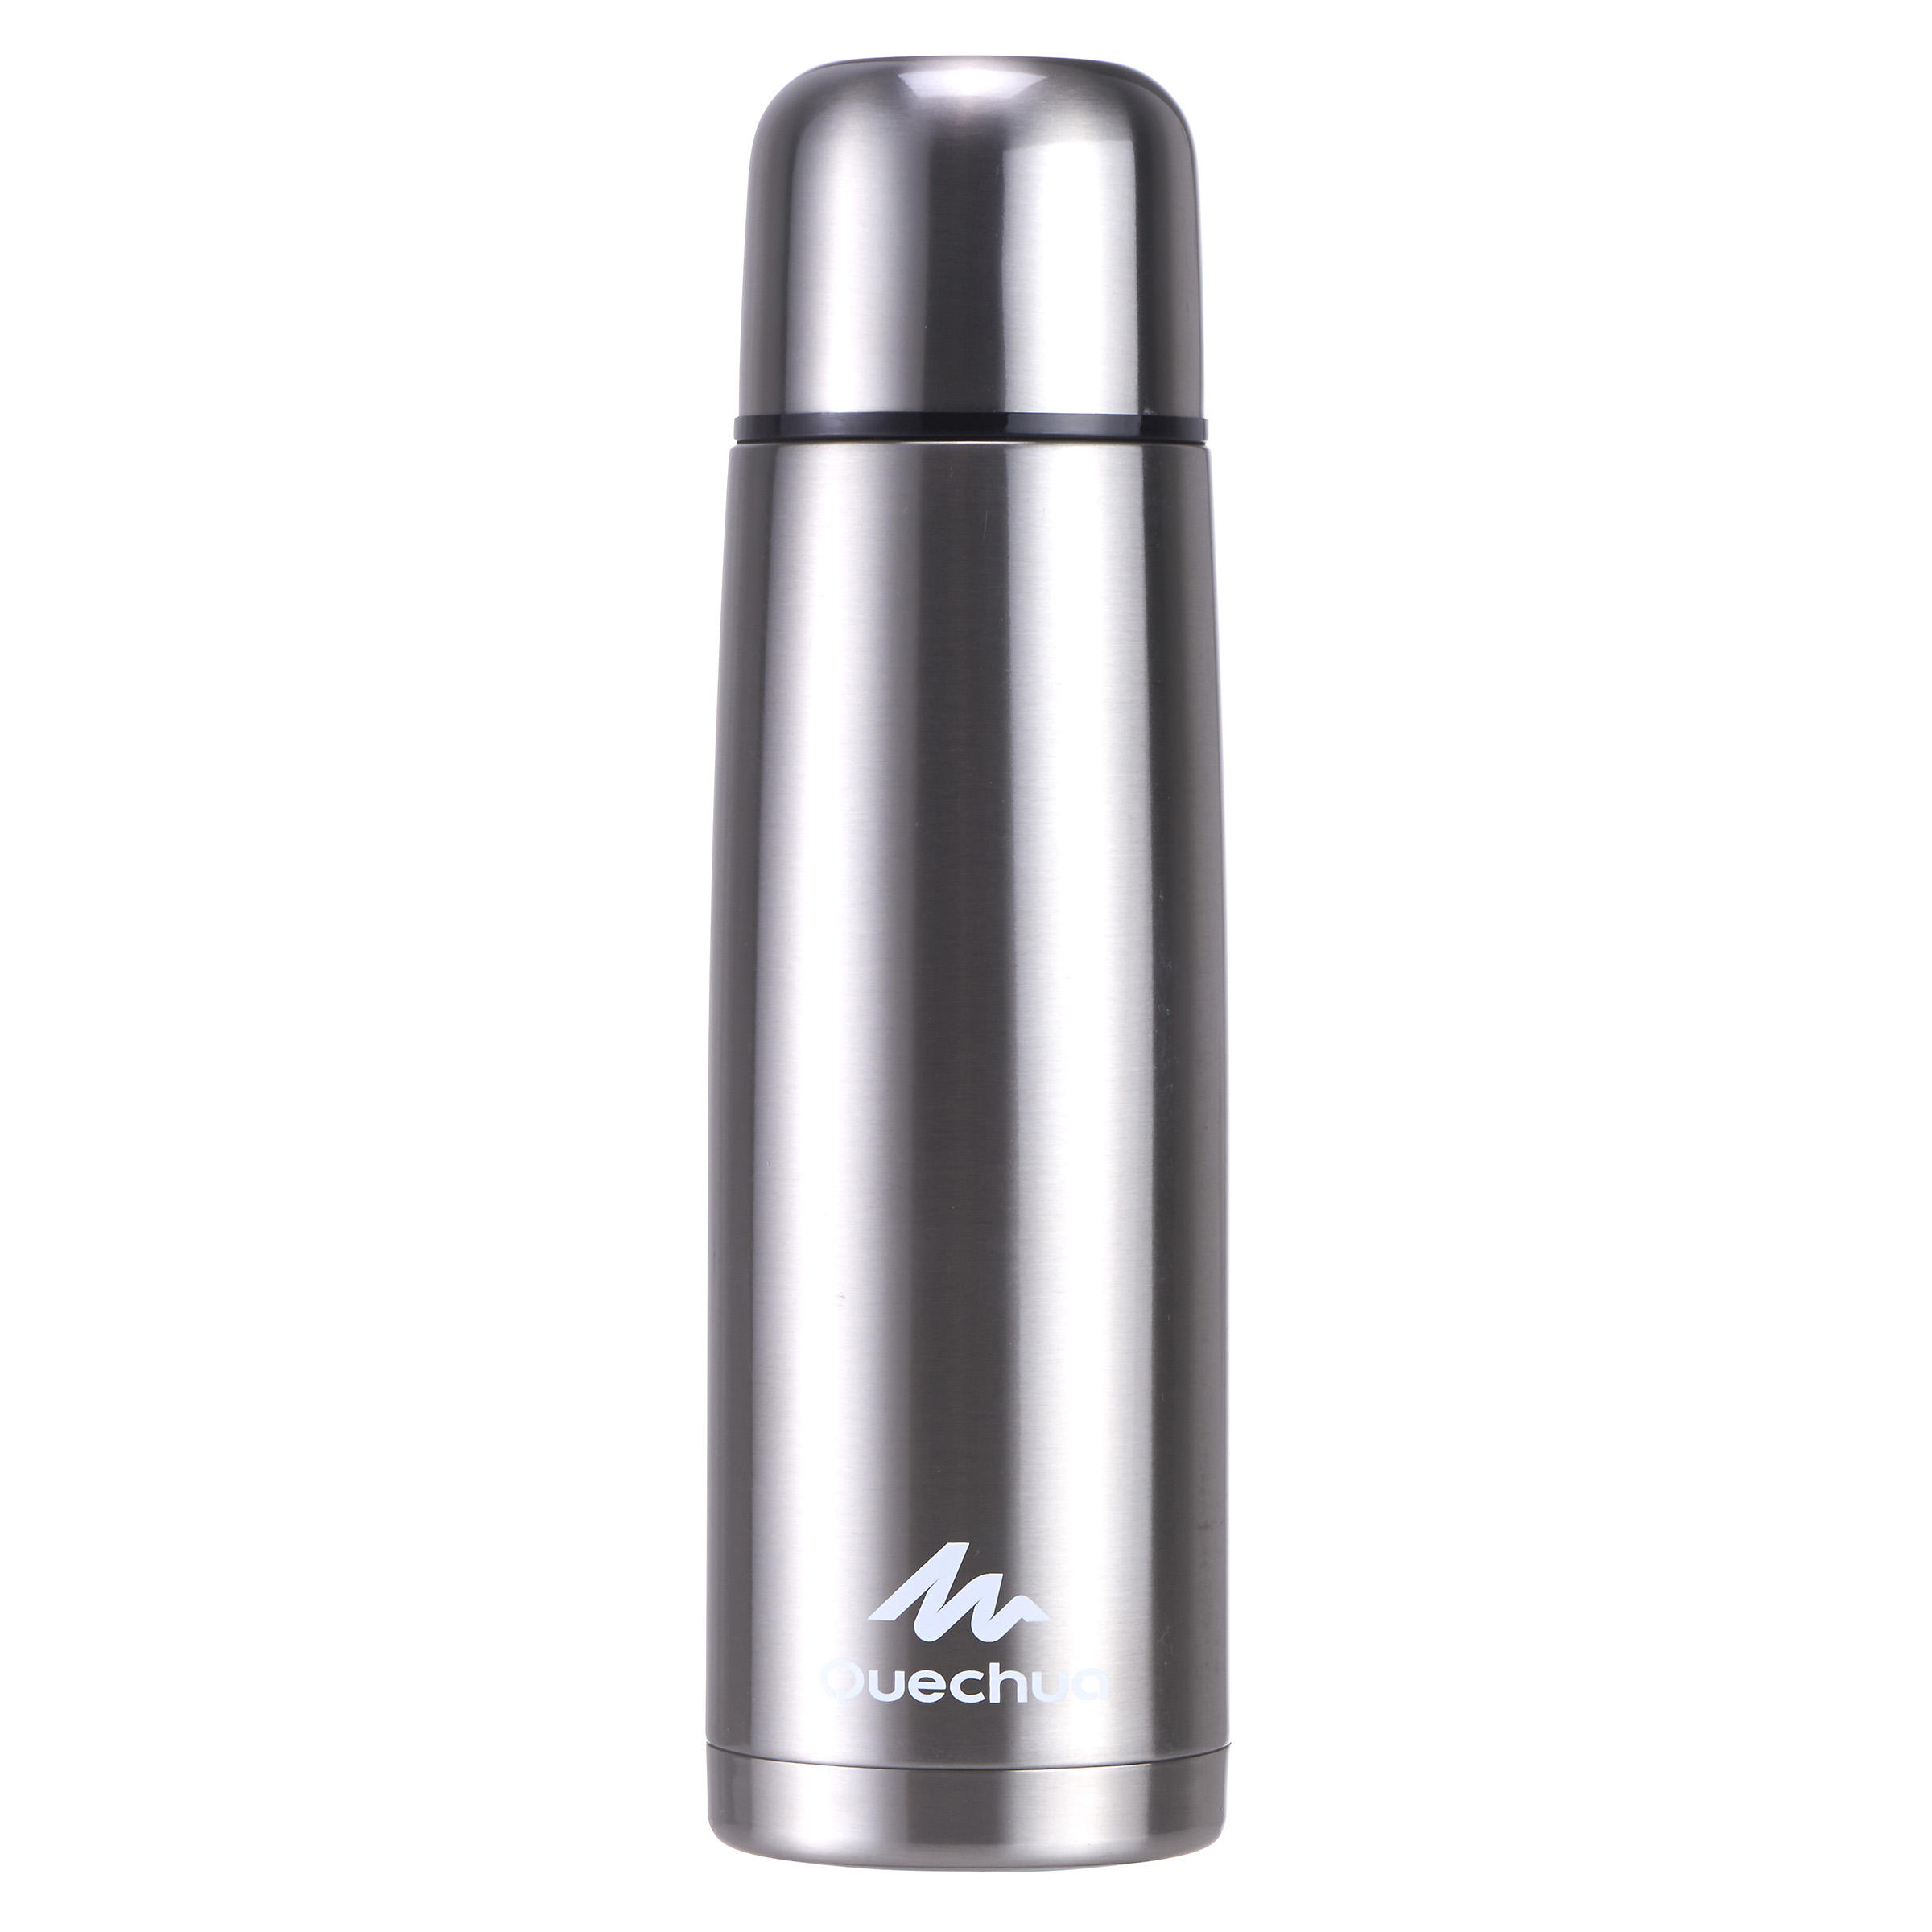 1 L stainless steel isothermal water bottle with cup for hiking - Silver 1/11